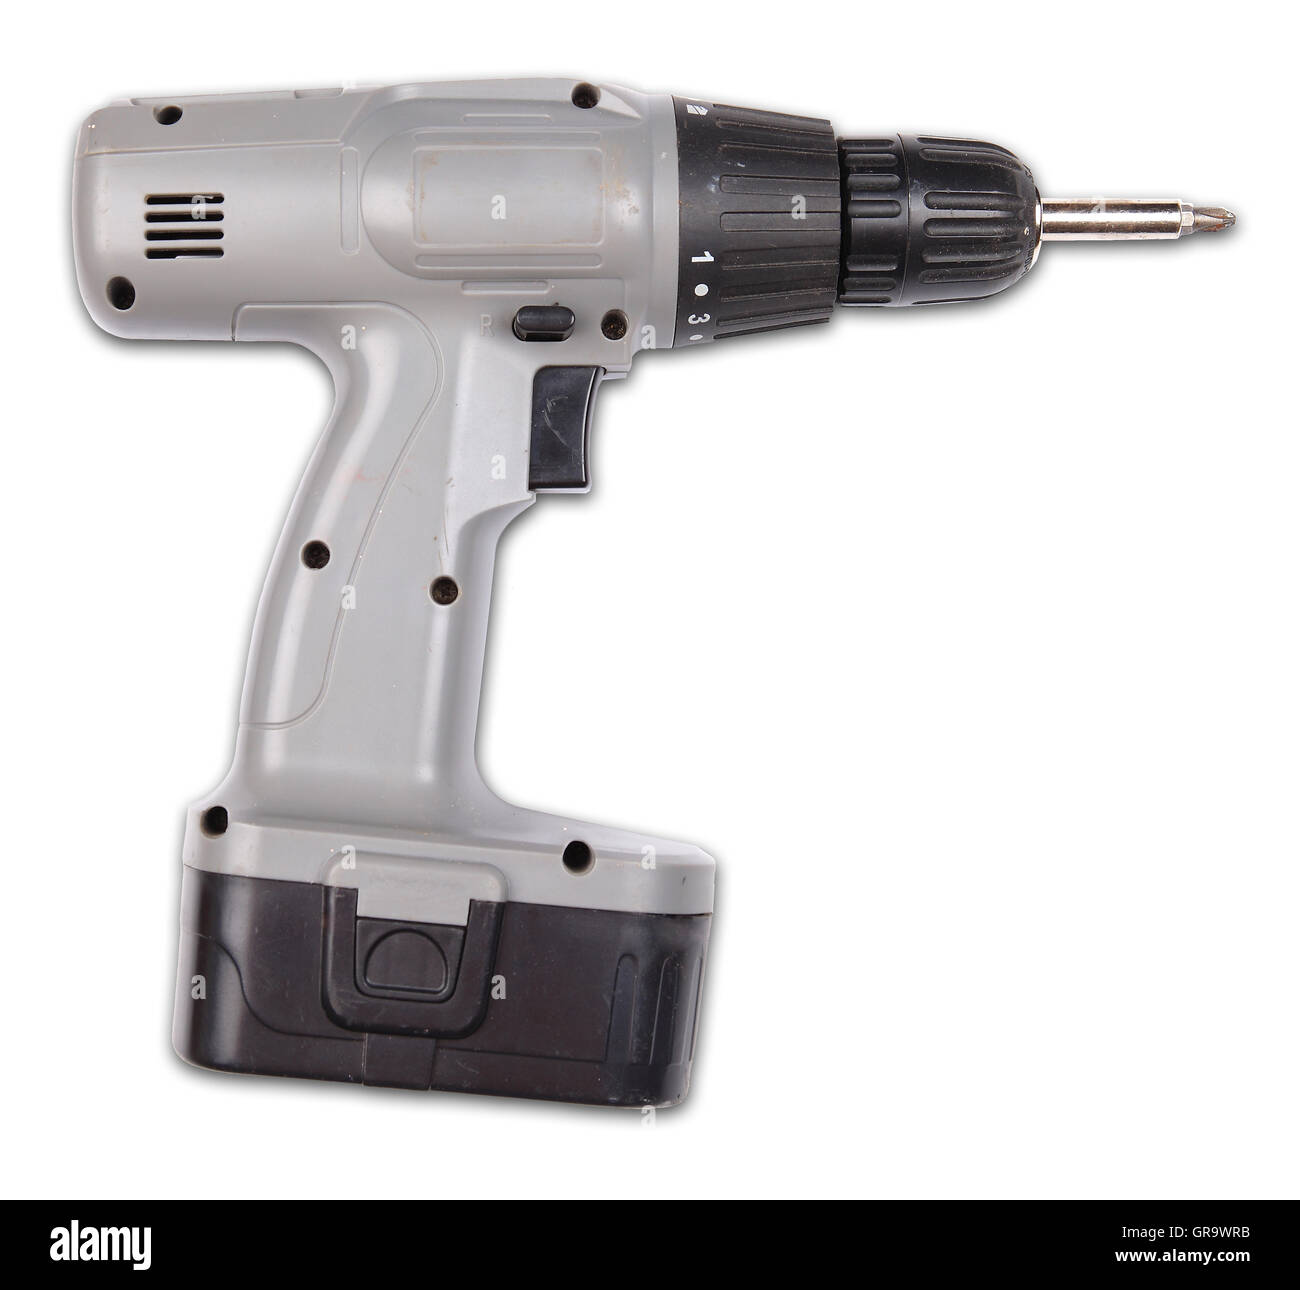 https://c8.alamy.com/comp/GR9WRB/old-cordless-drill-with-twist-bit-isolated-on-white-background-GR9WRB.jpg